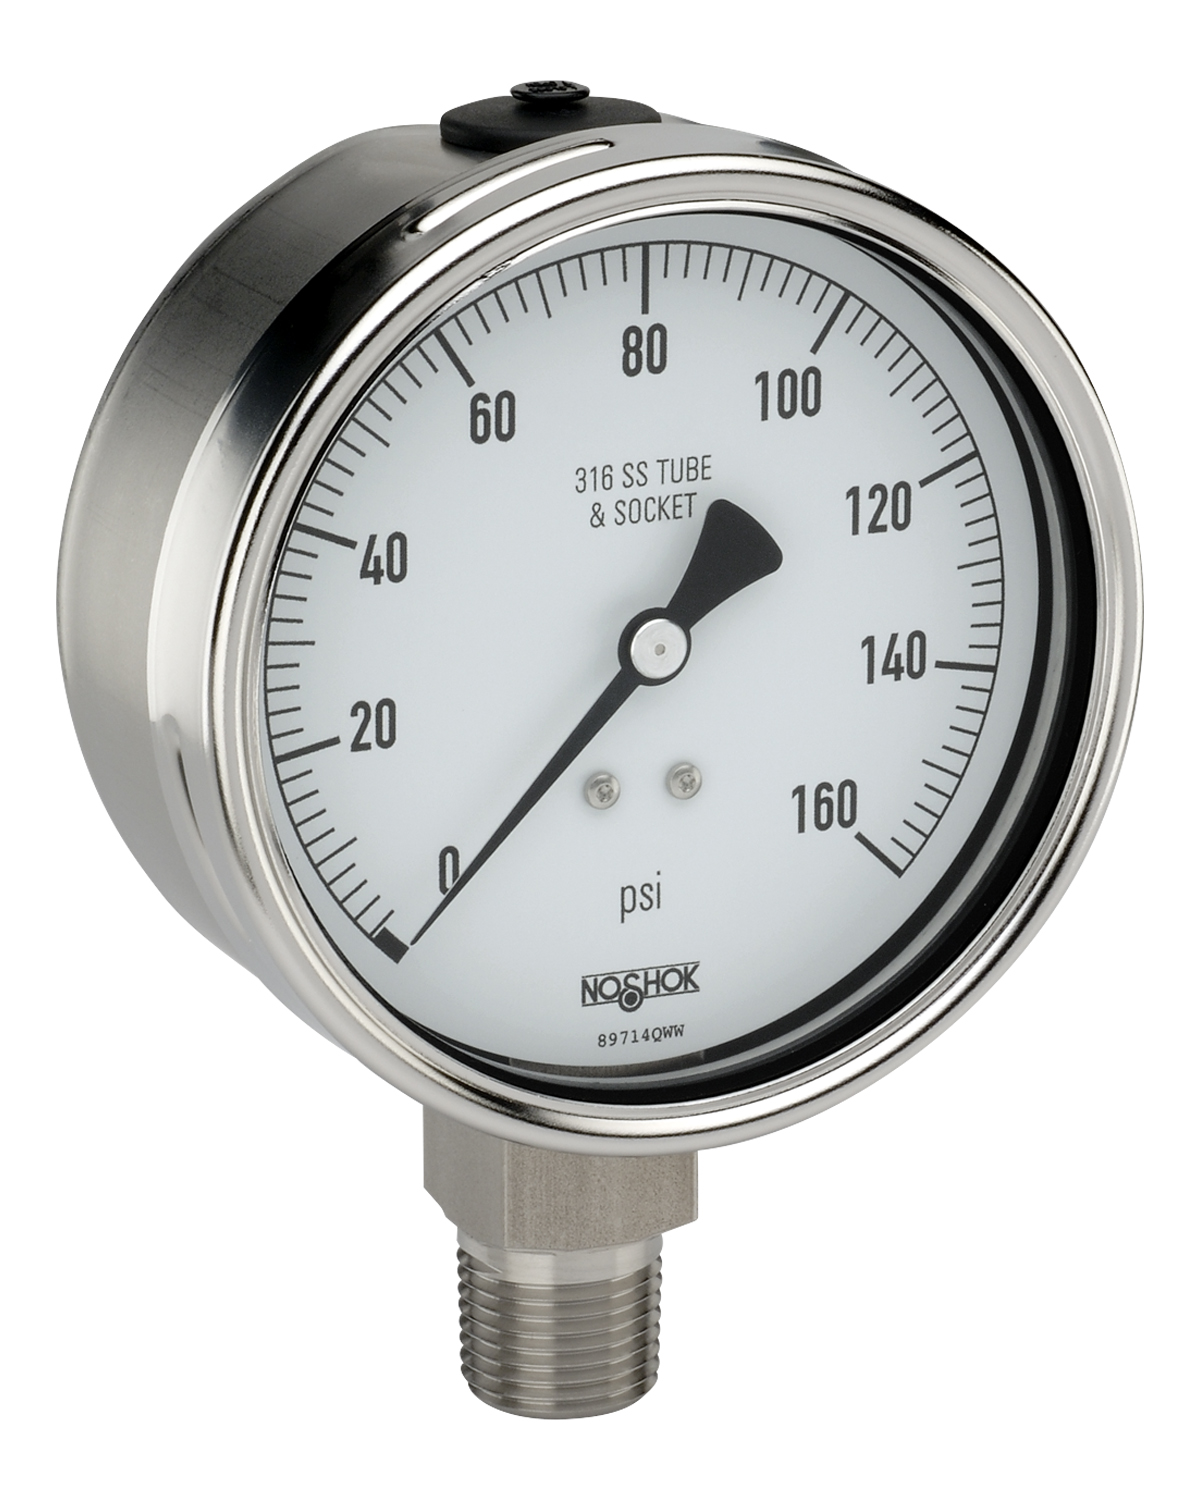 40-500-100-psi/bar-1/4 400/500 Series All Stainless Steel Dry and Liquid Filled Pressure Gauges